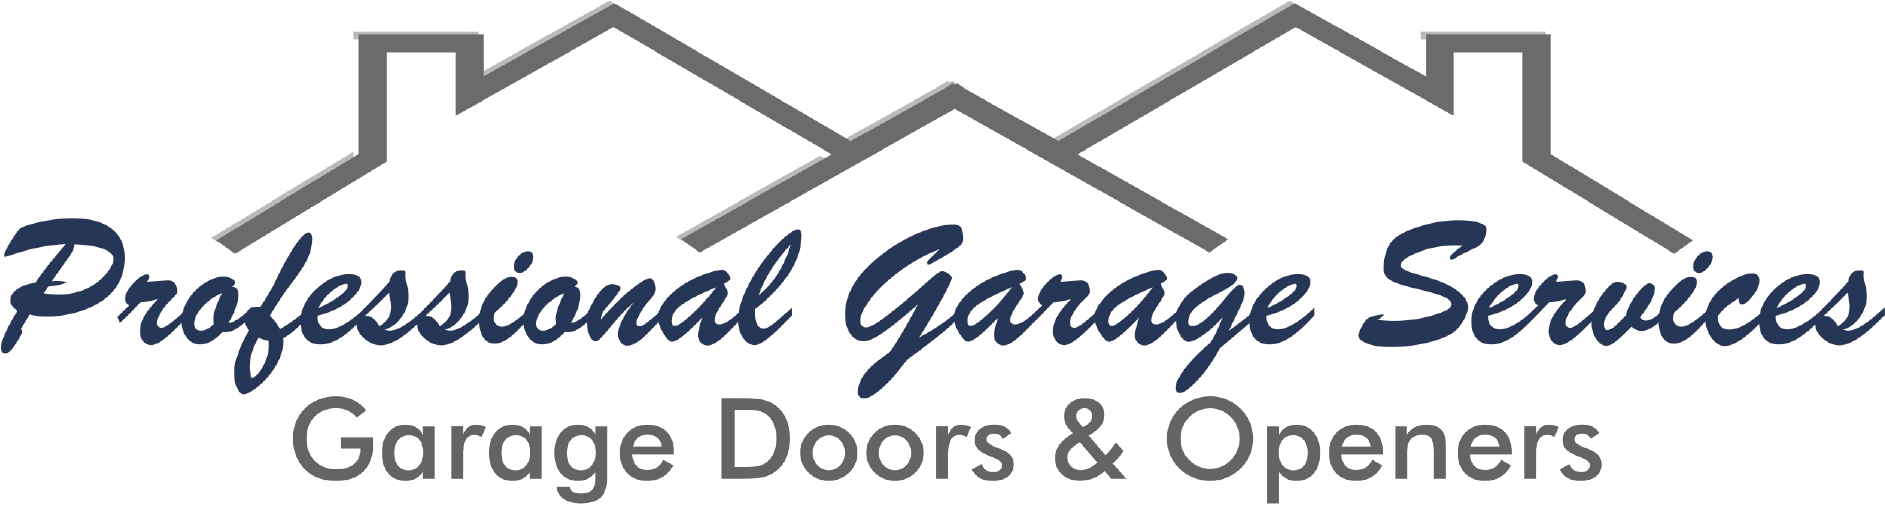 A black and white logo of a garage door company.